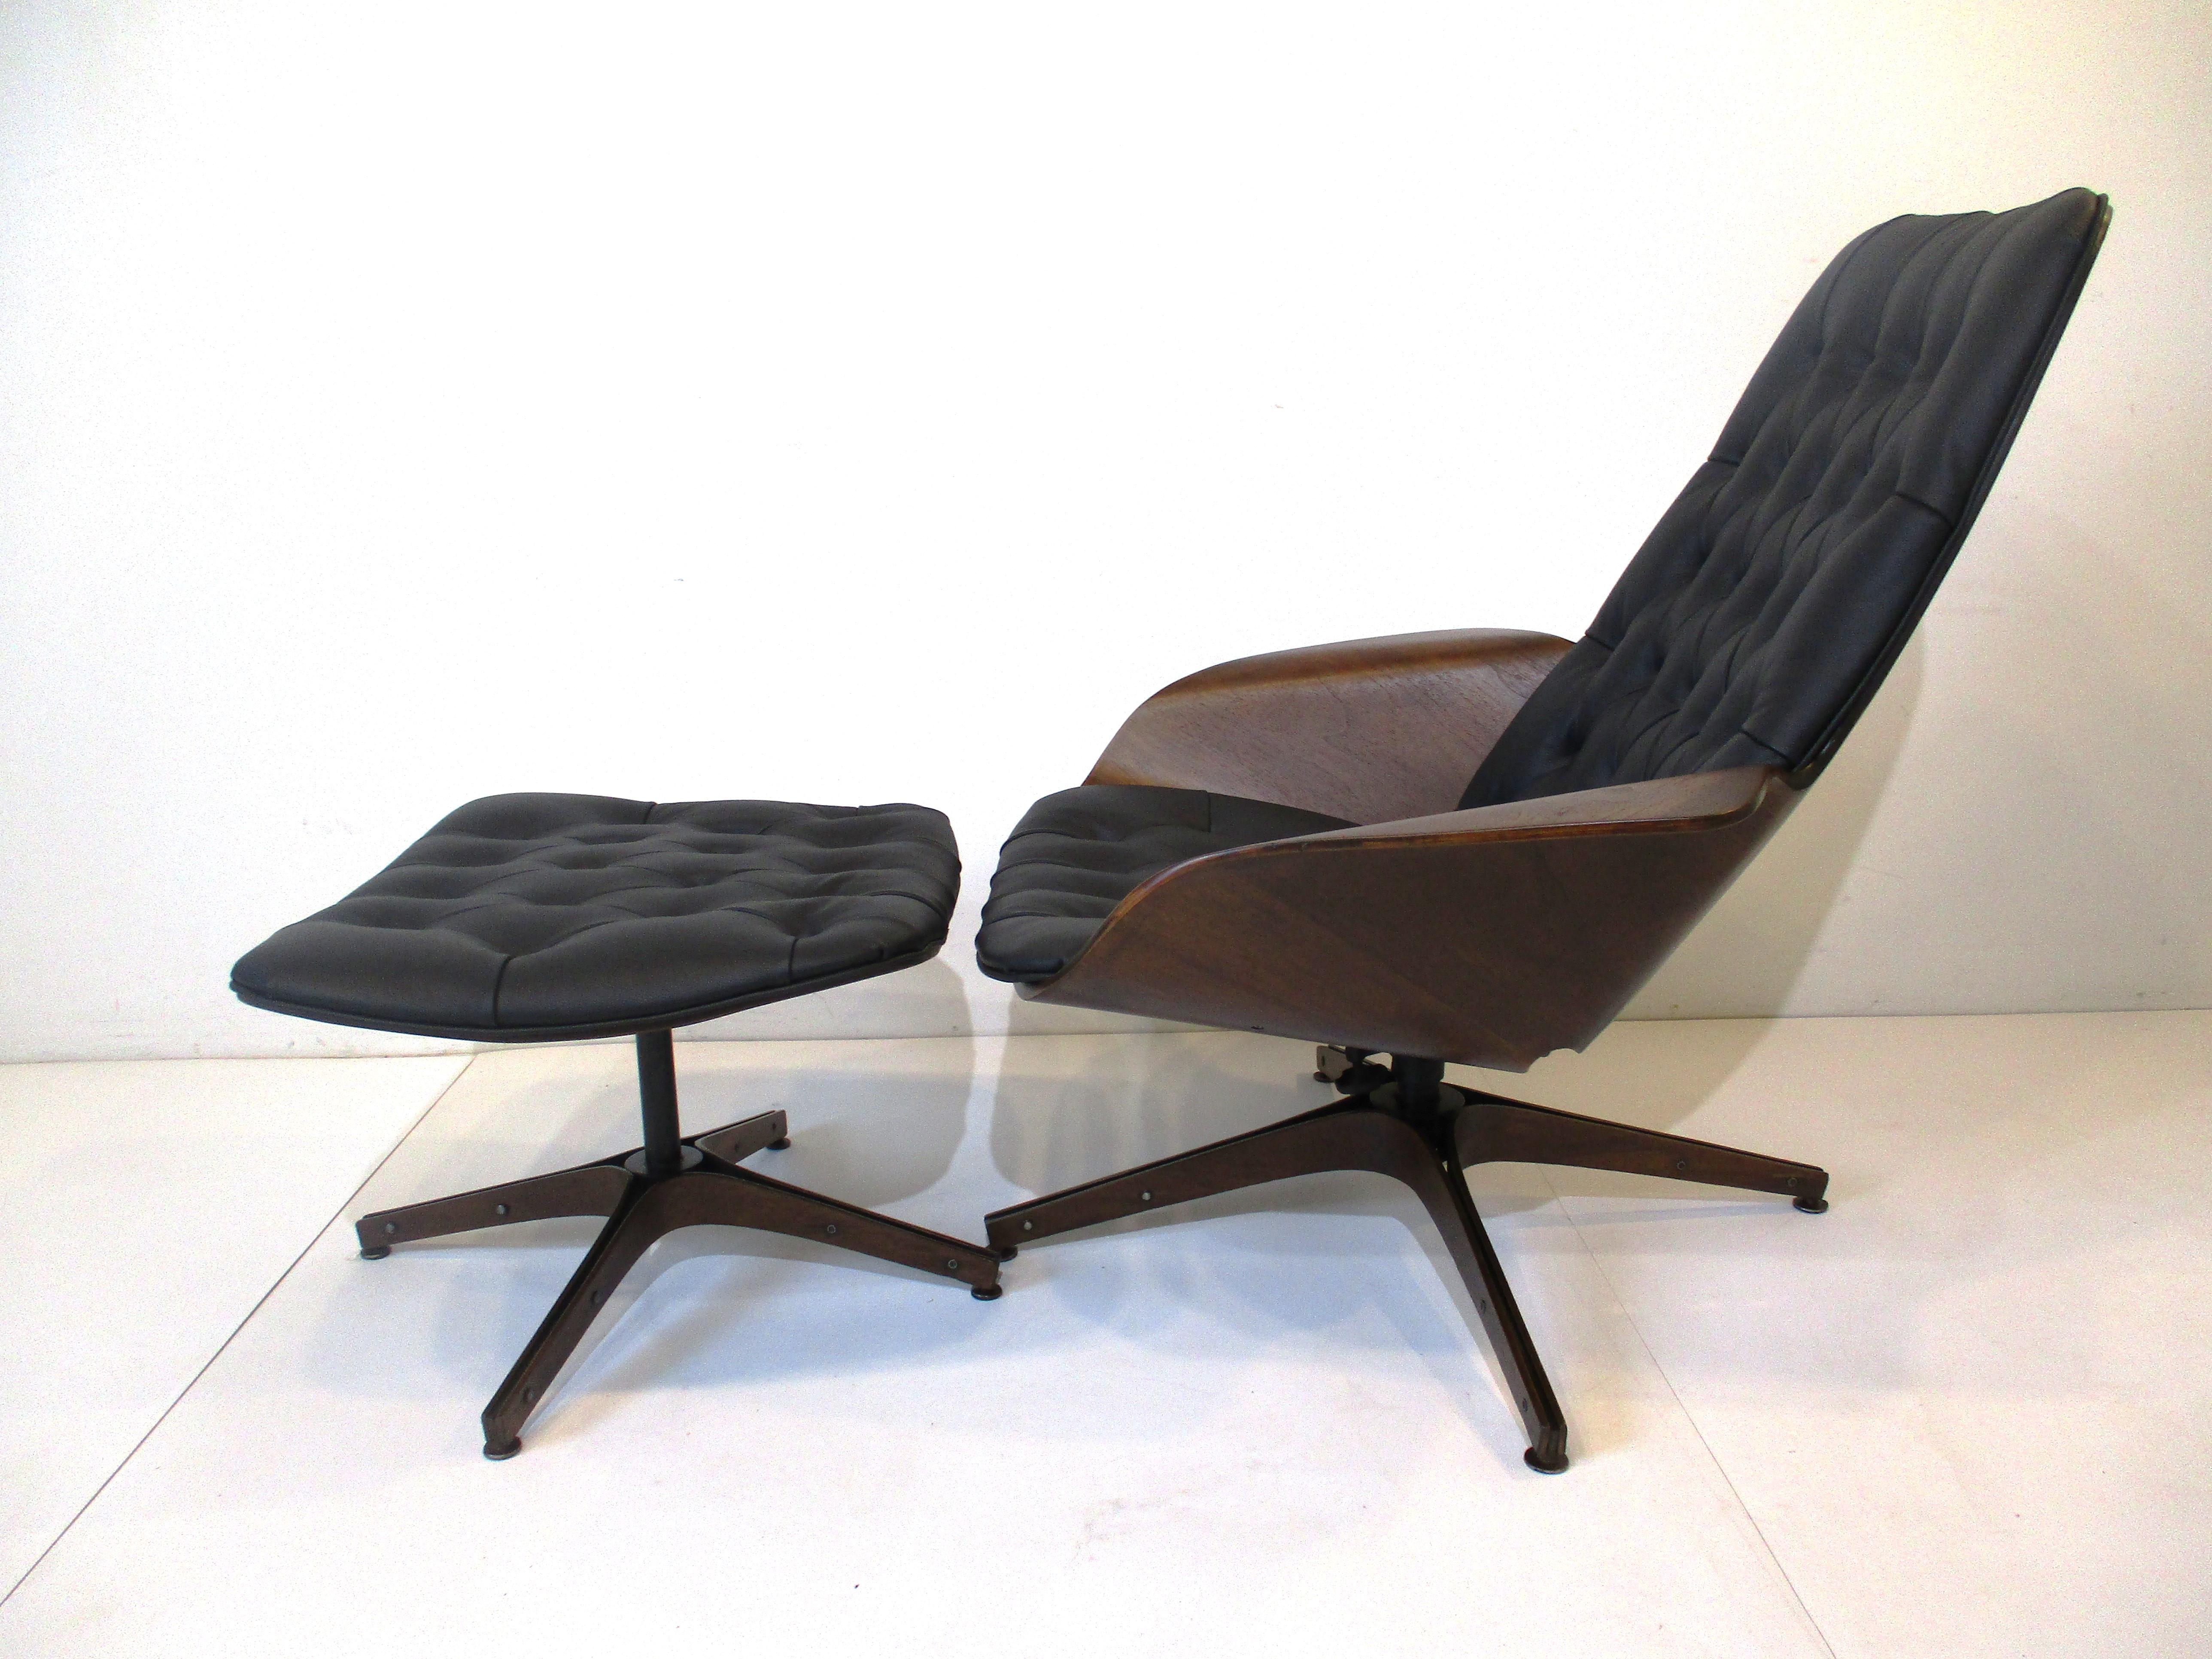 A sculptural dark walnut bent wood framed lounge chair with matching ottoman both with tuffed black soft leather cushions . The star bases have bent wood and steel legs with foot pads , both chair and ottoman swivel for comfort . The Mr. Chair